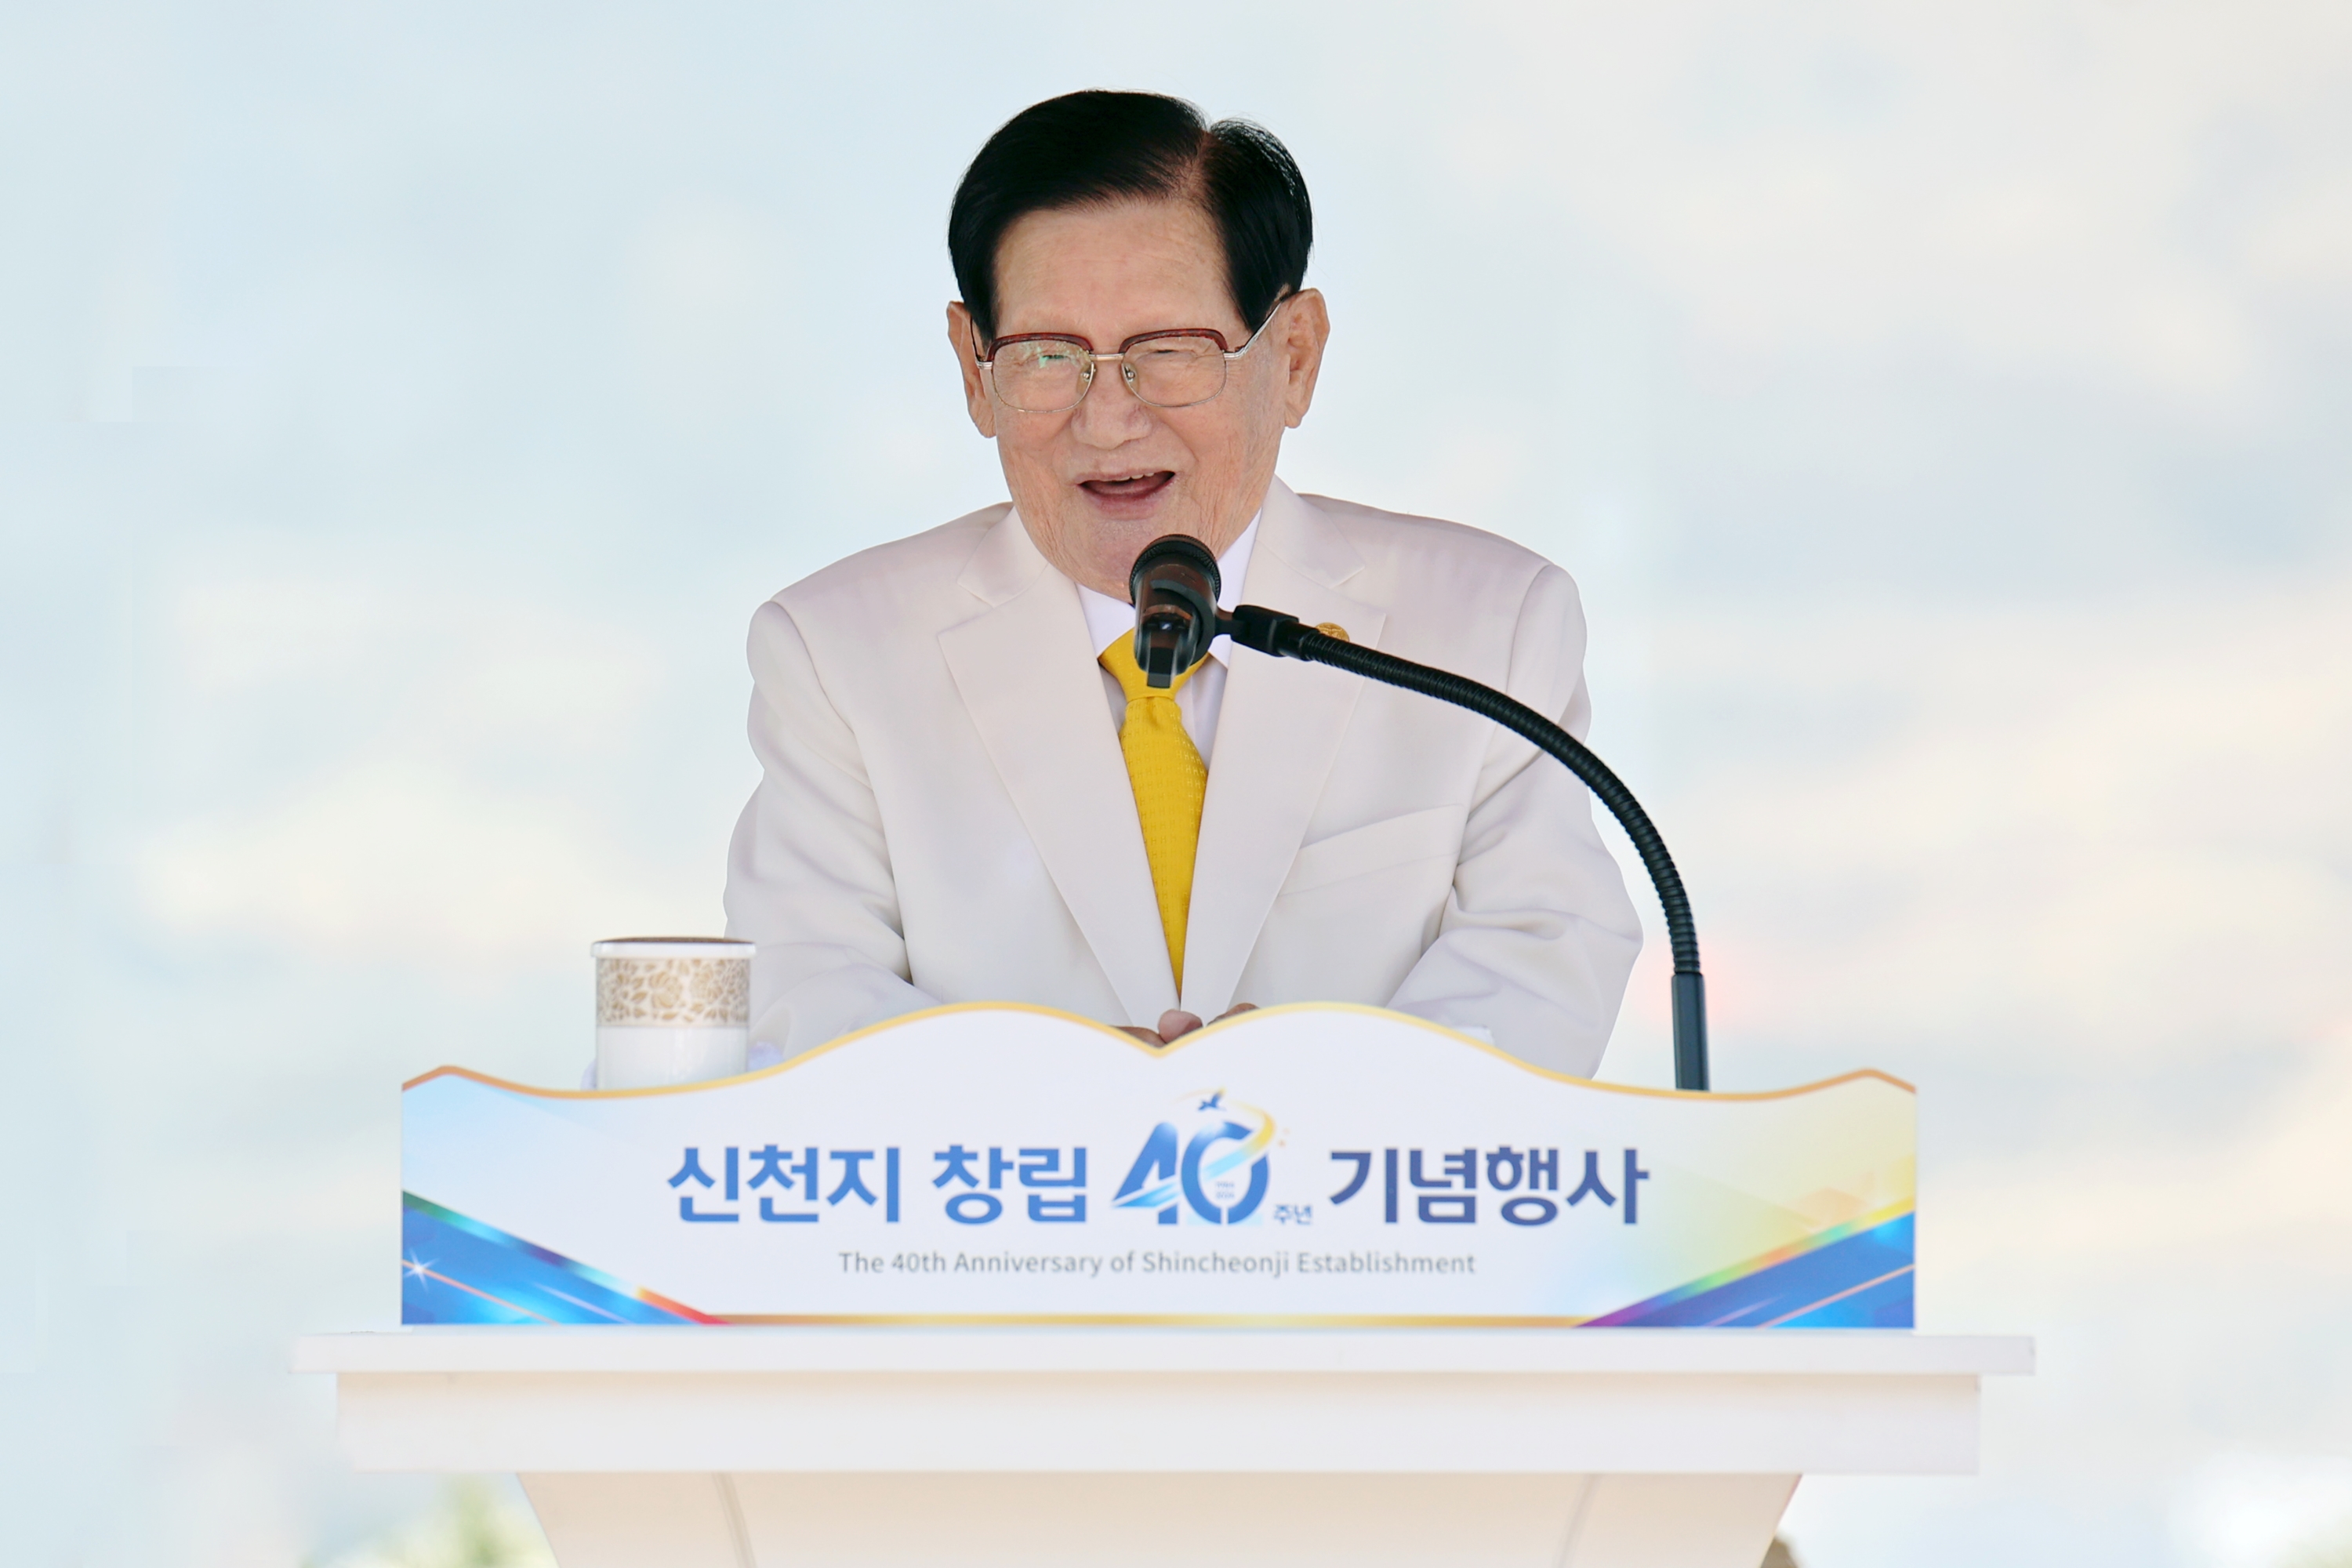 On the morning of the 14th Chairman Man hee Lee is giving a sermon during the 40th anniversary cerem